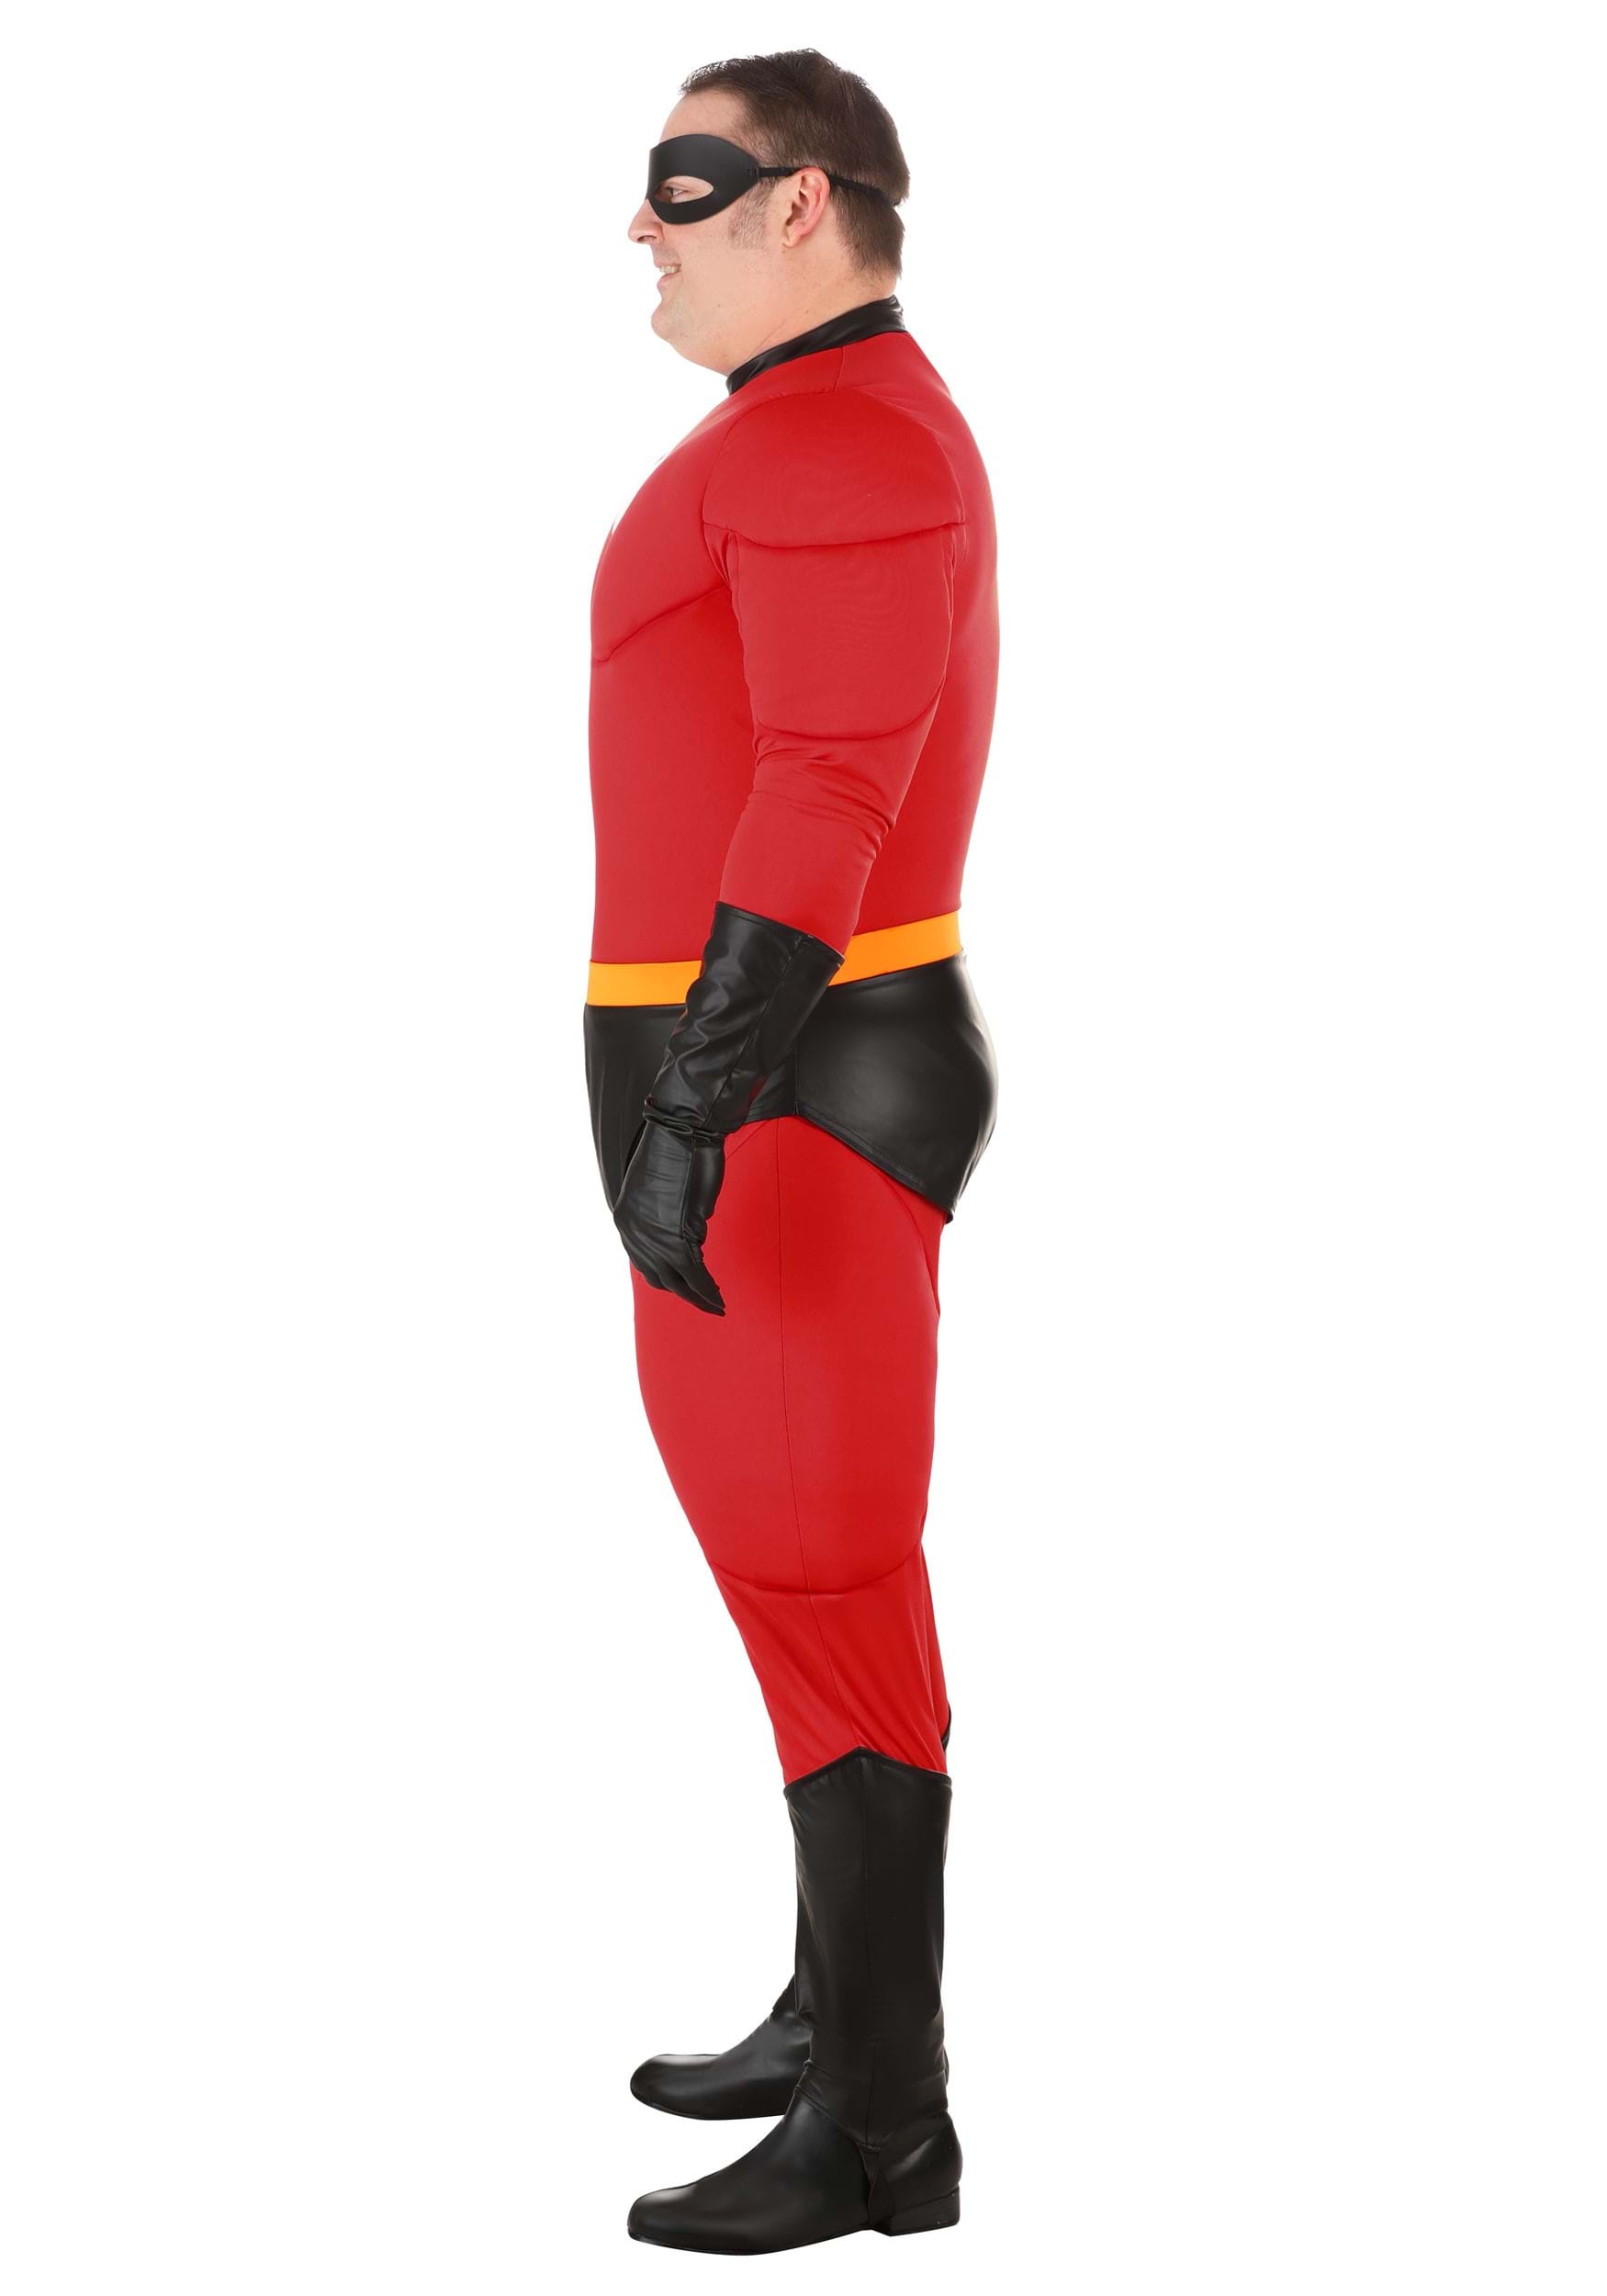 Disney The Incredibles Plus Size Deluxe Mr. Incredible Costume